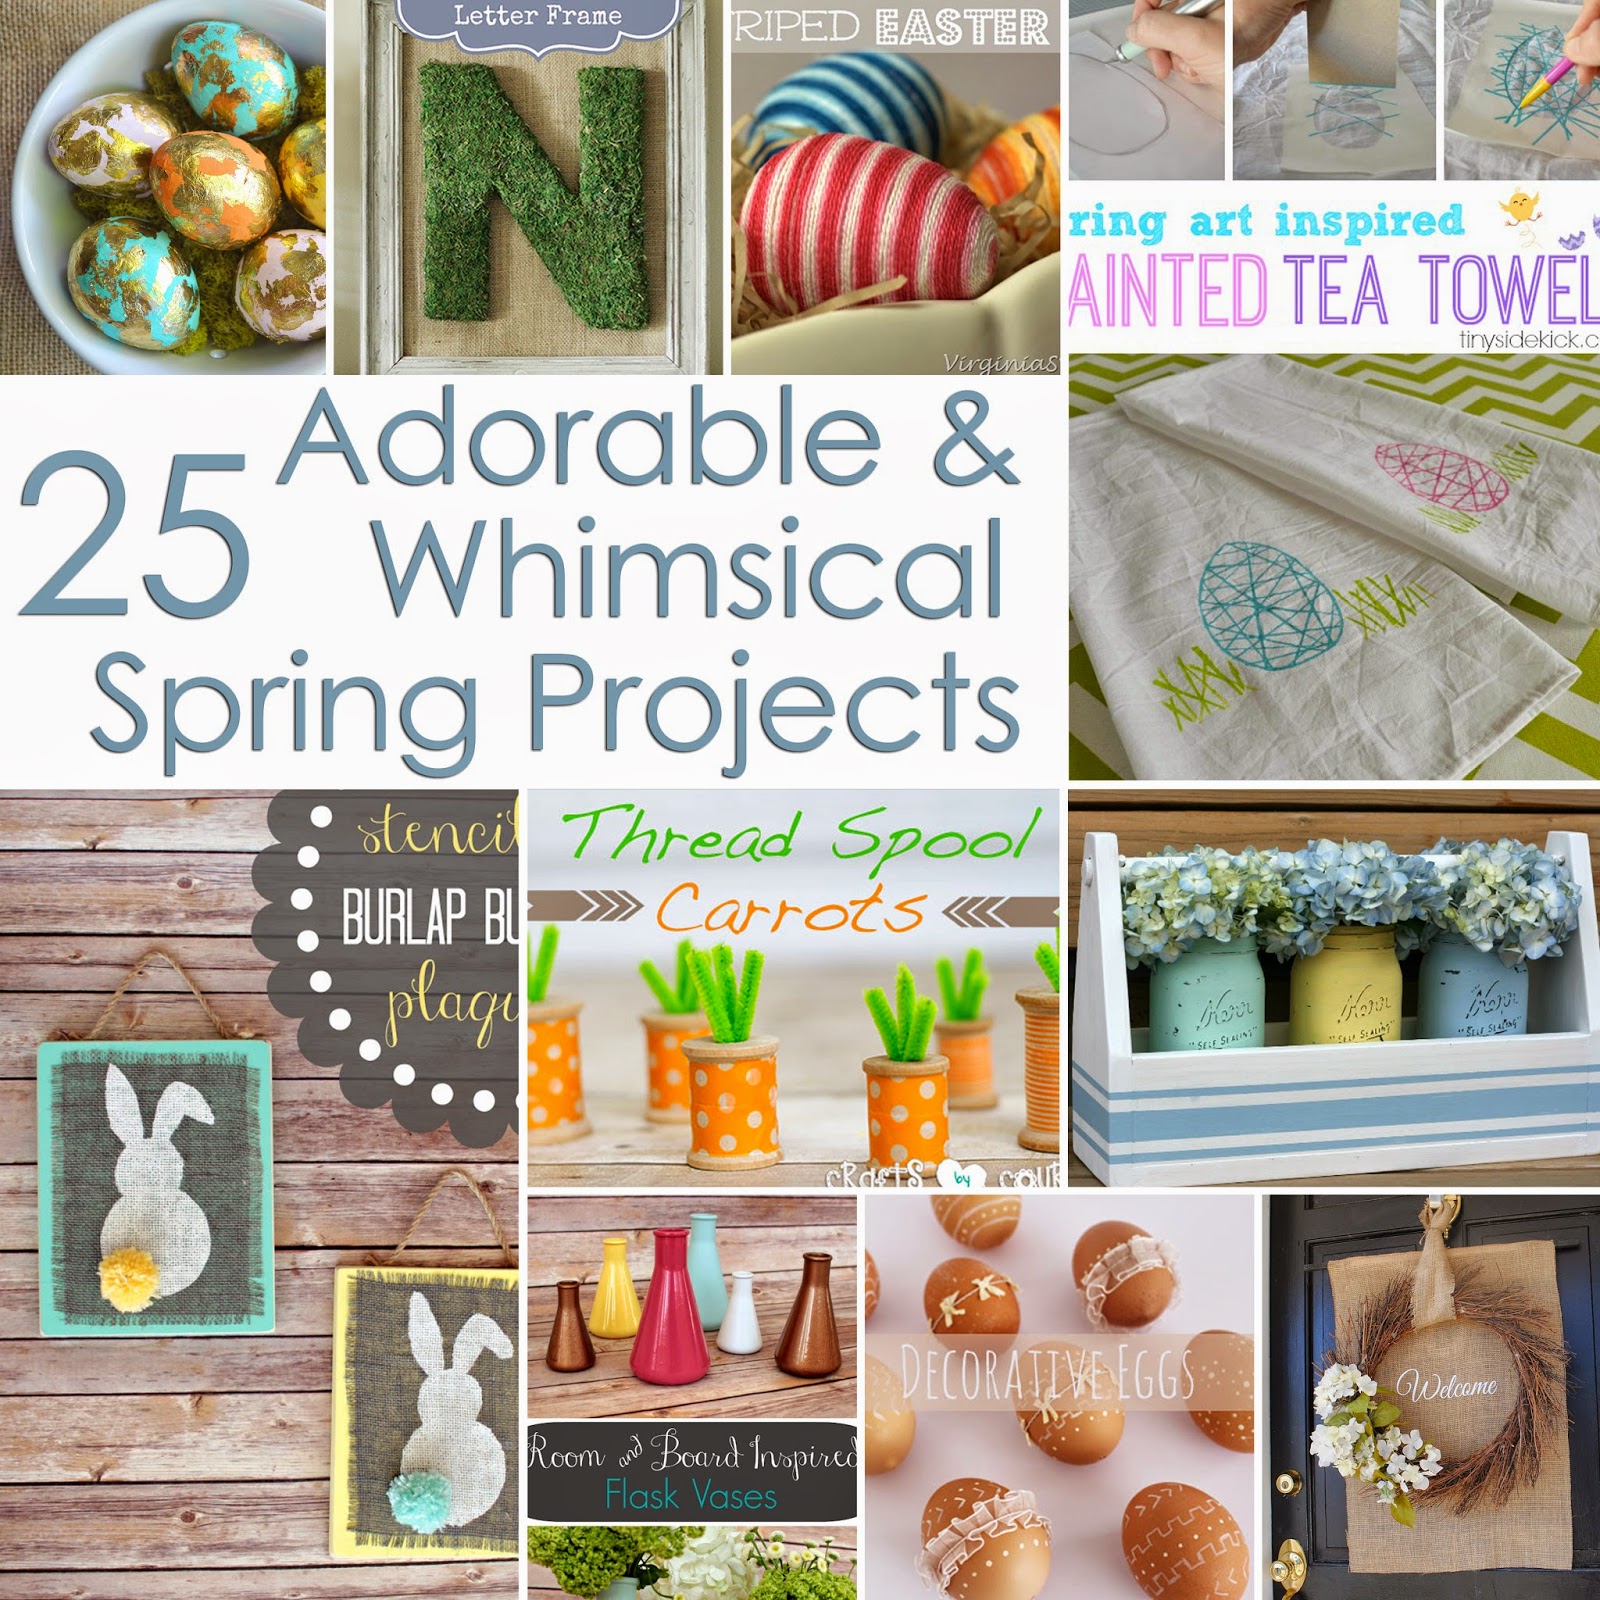 25 Adorable & Whimsical Spring Projects